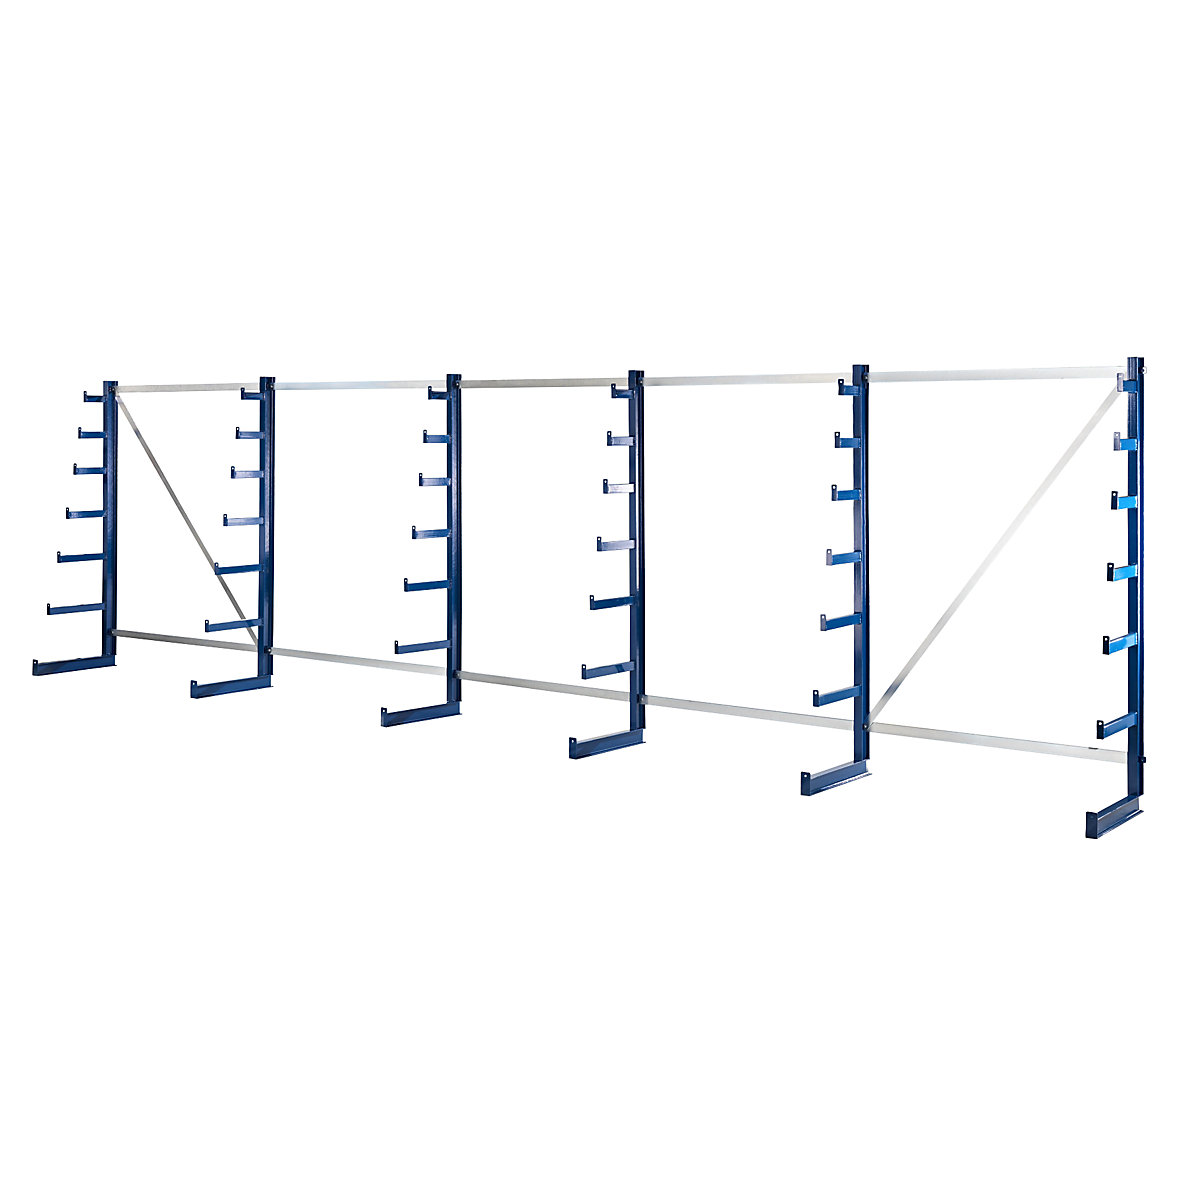 Cantilever racking unit with cantilever arms which taper towards the top - eurokraft pro